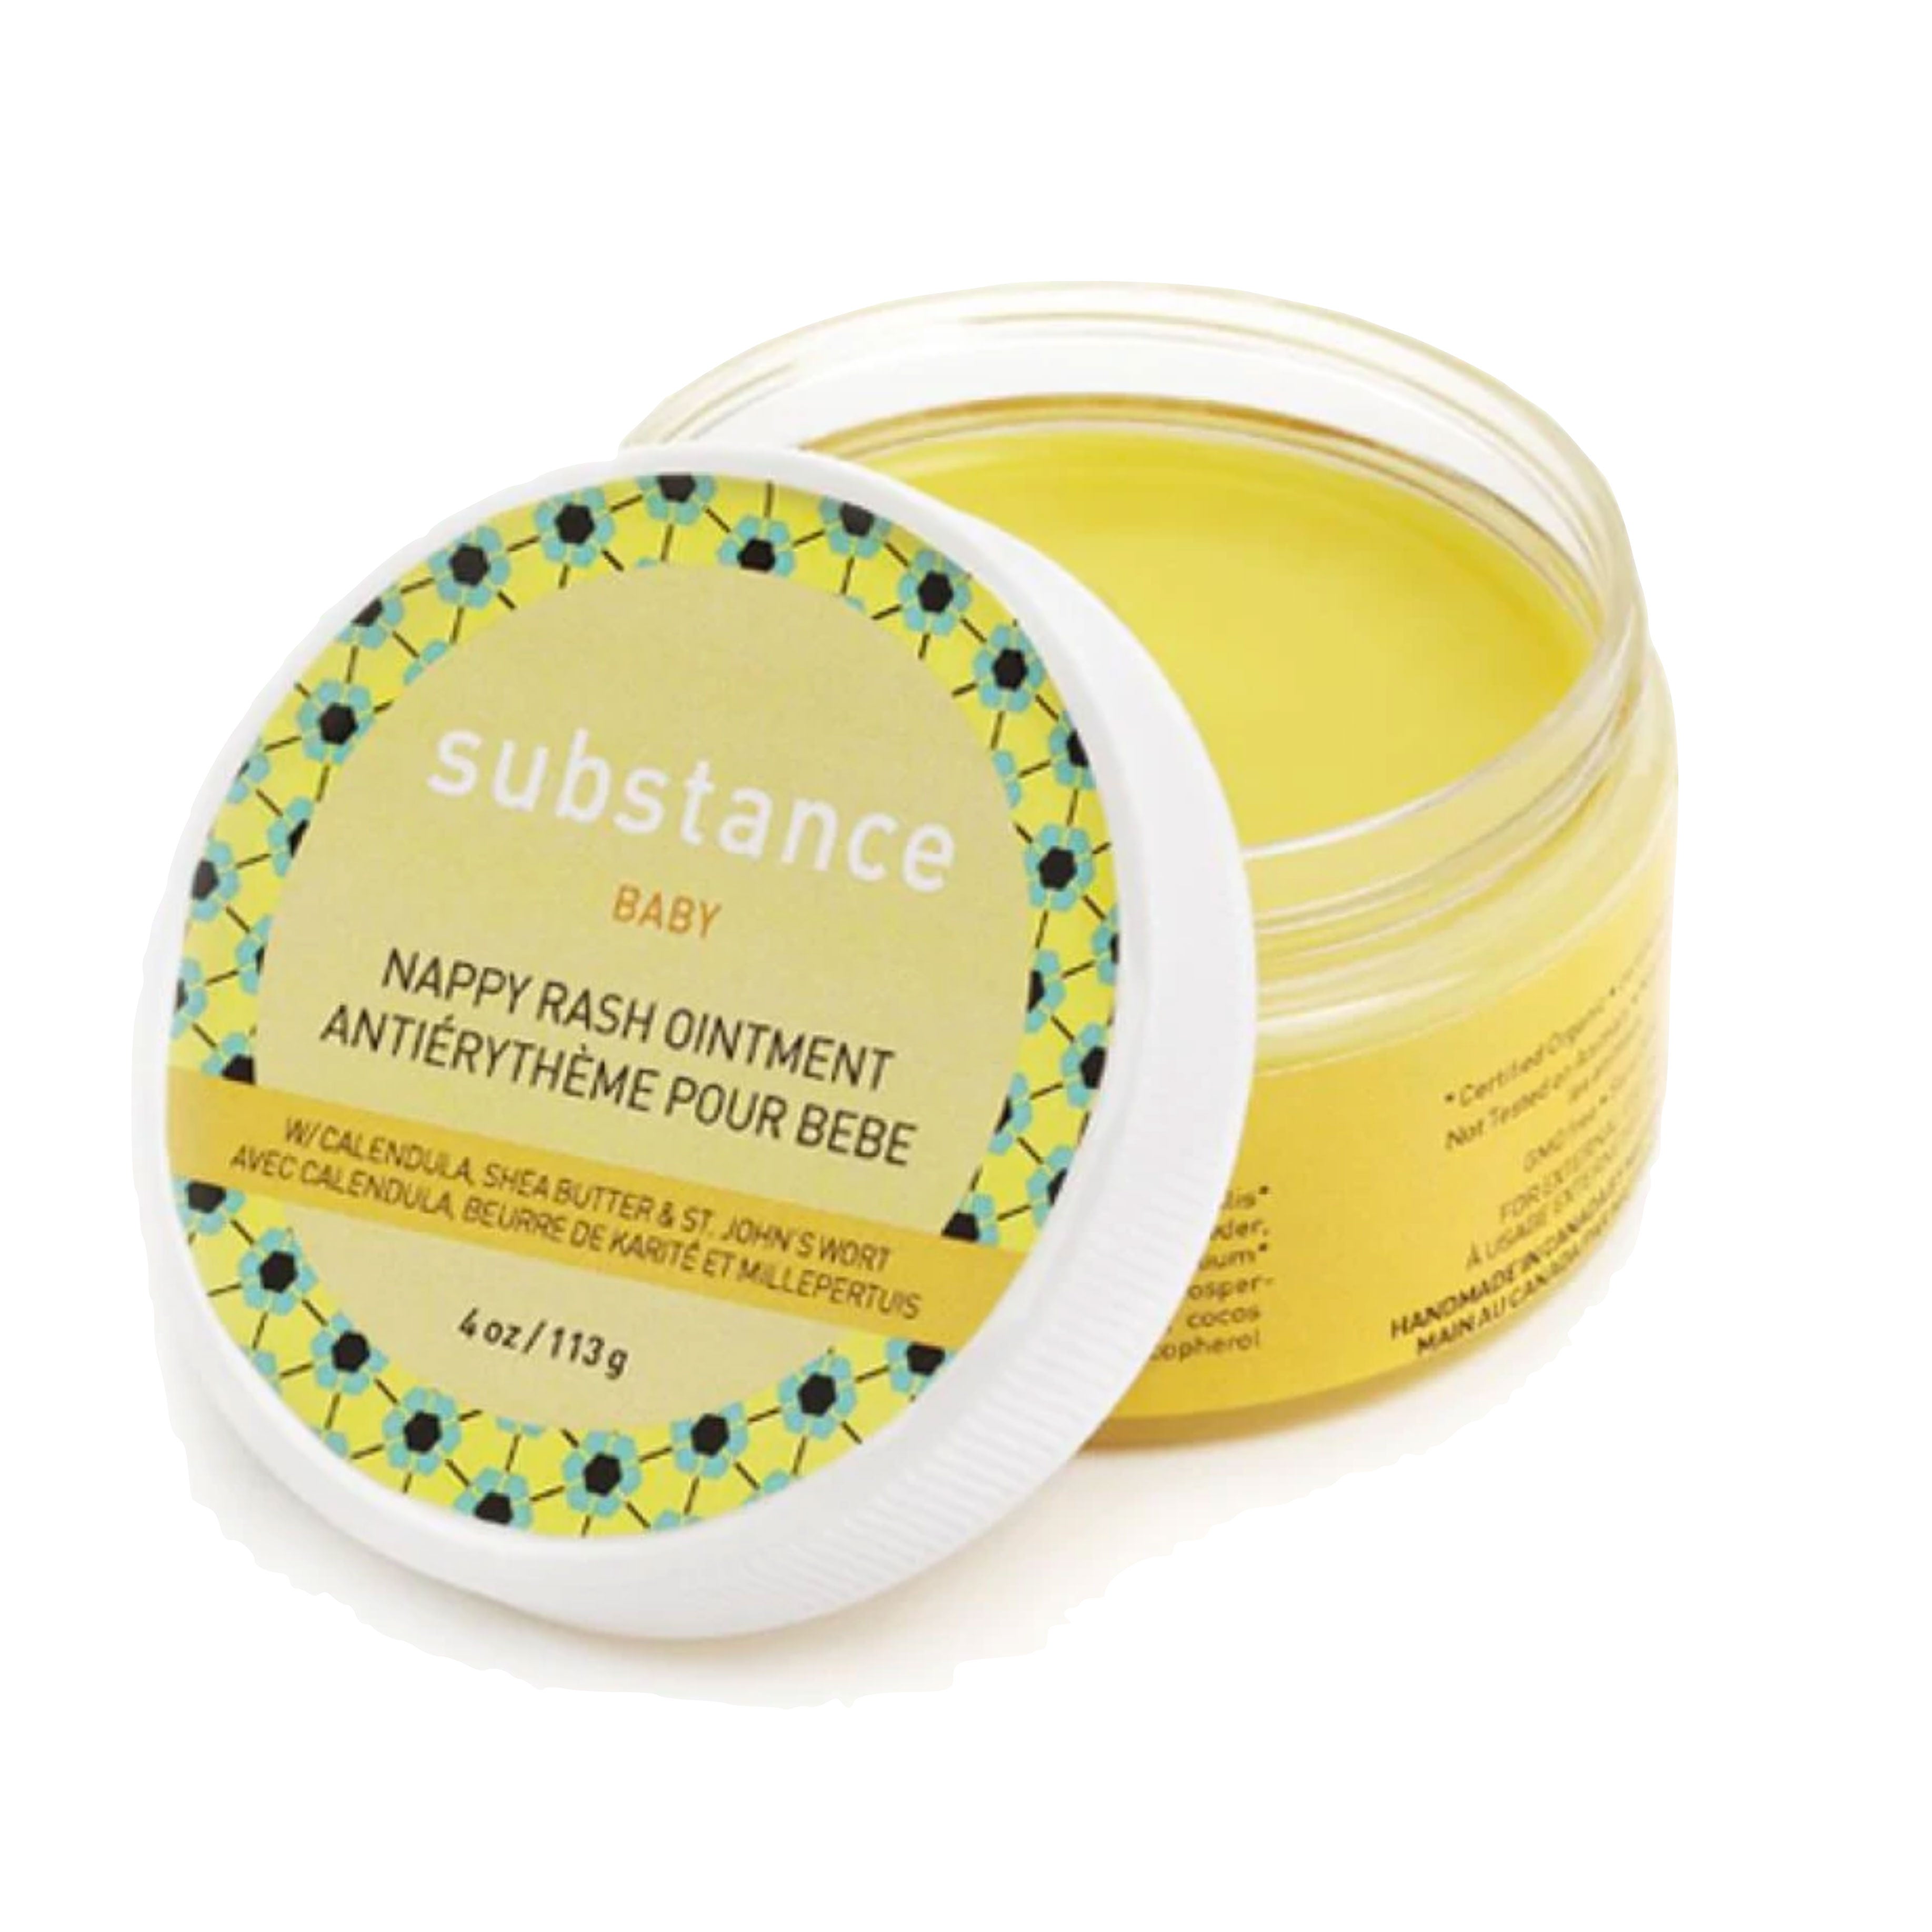 Organic and natural Baby Nappy Rash Ointment made in Canada at Bonjour Baby Baskets